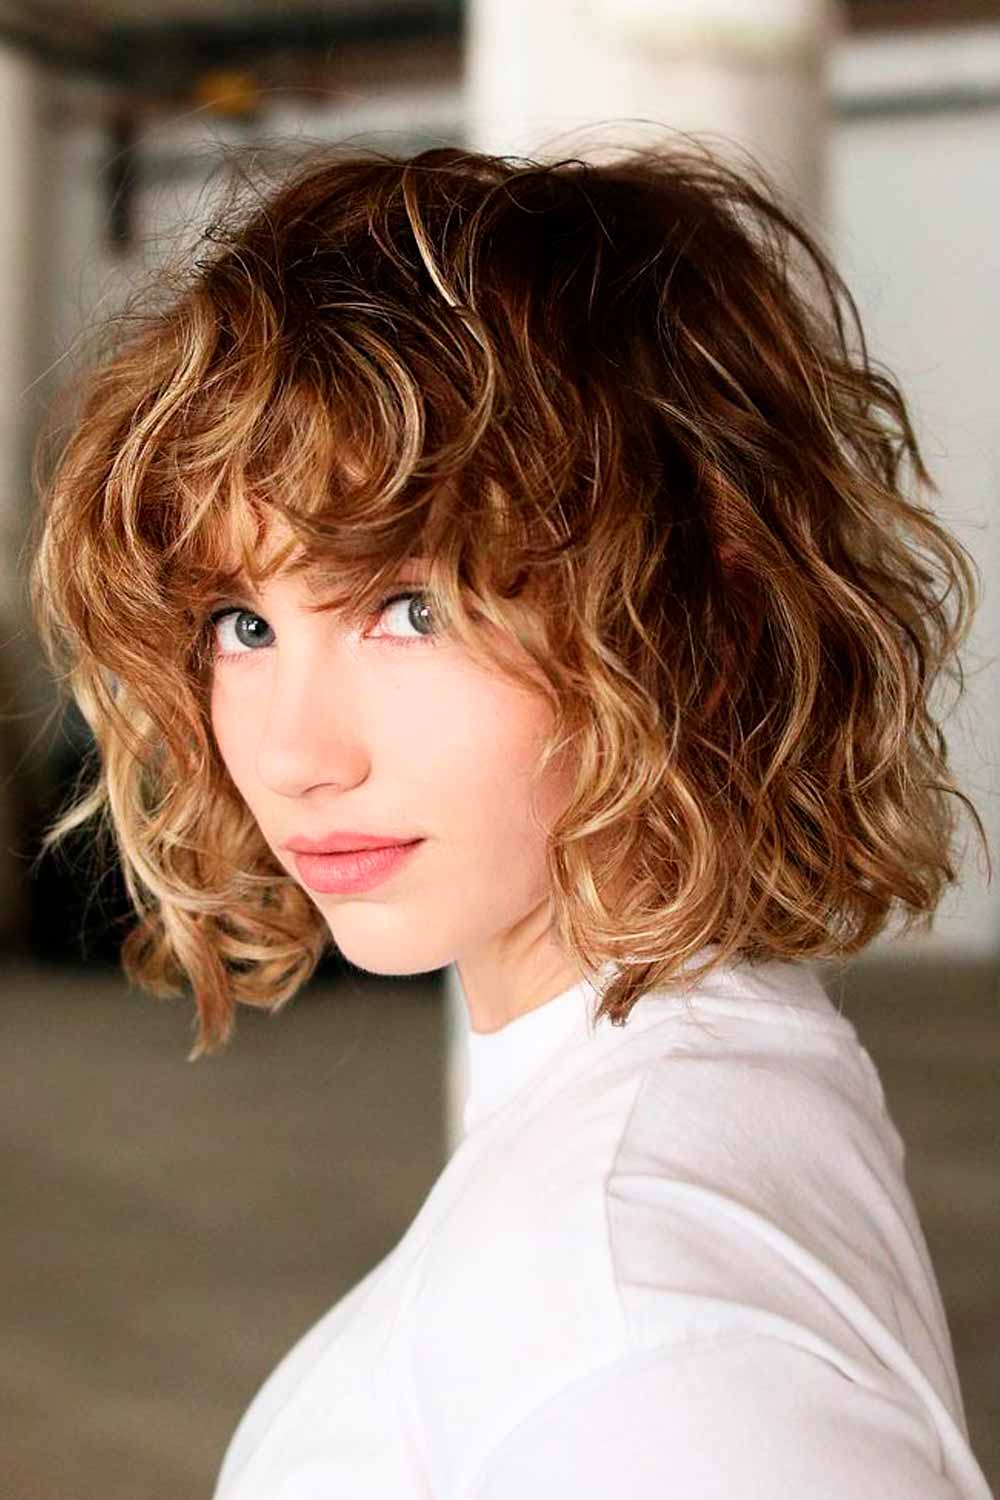 Well-Balanced Rounded Curly Bob With Bangs #curlybob #haircuts #bobhaircuts #curlyhairstyles